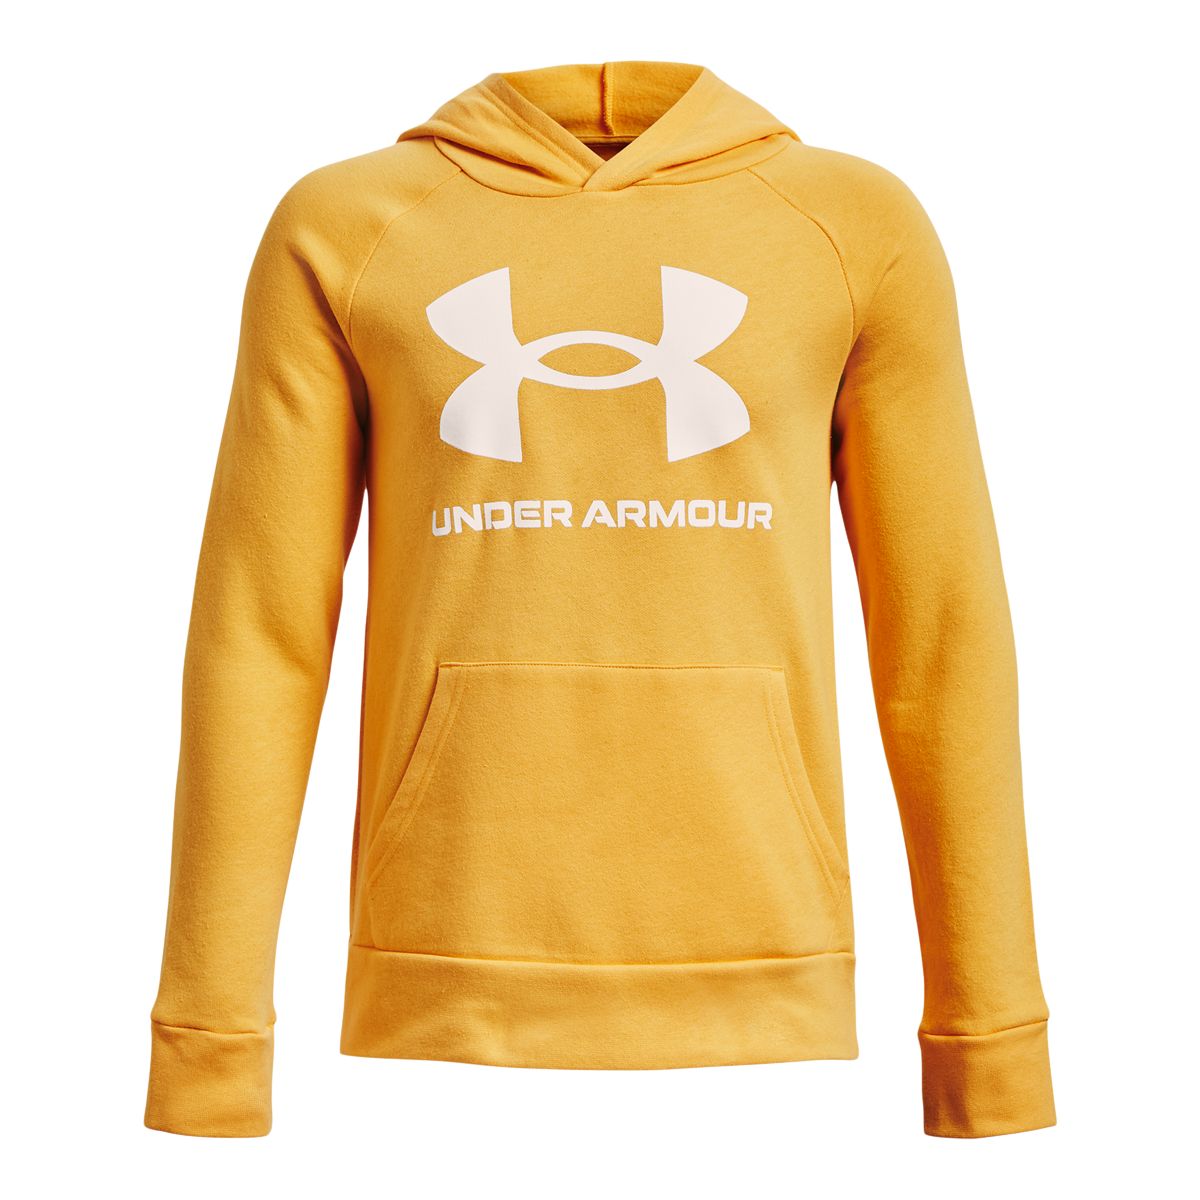 Under Armour Boys' Rival Fleece Graphic Pullover Hoodie